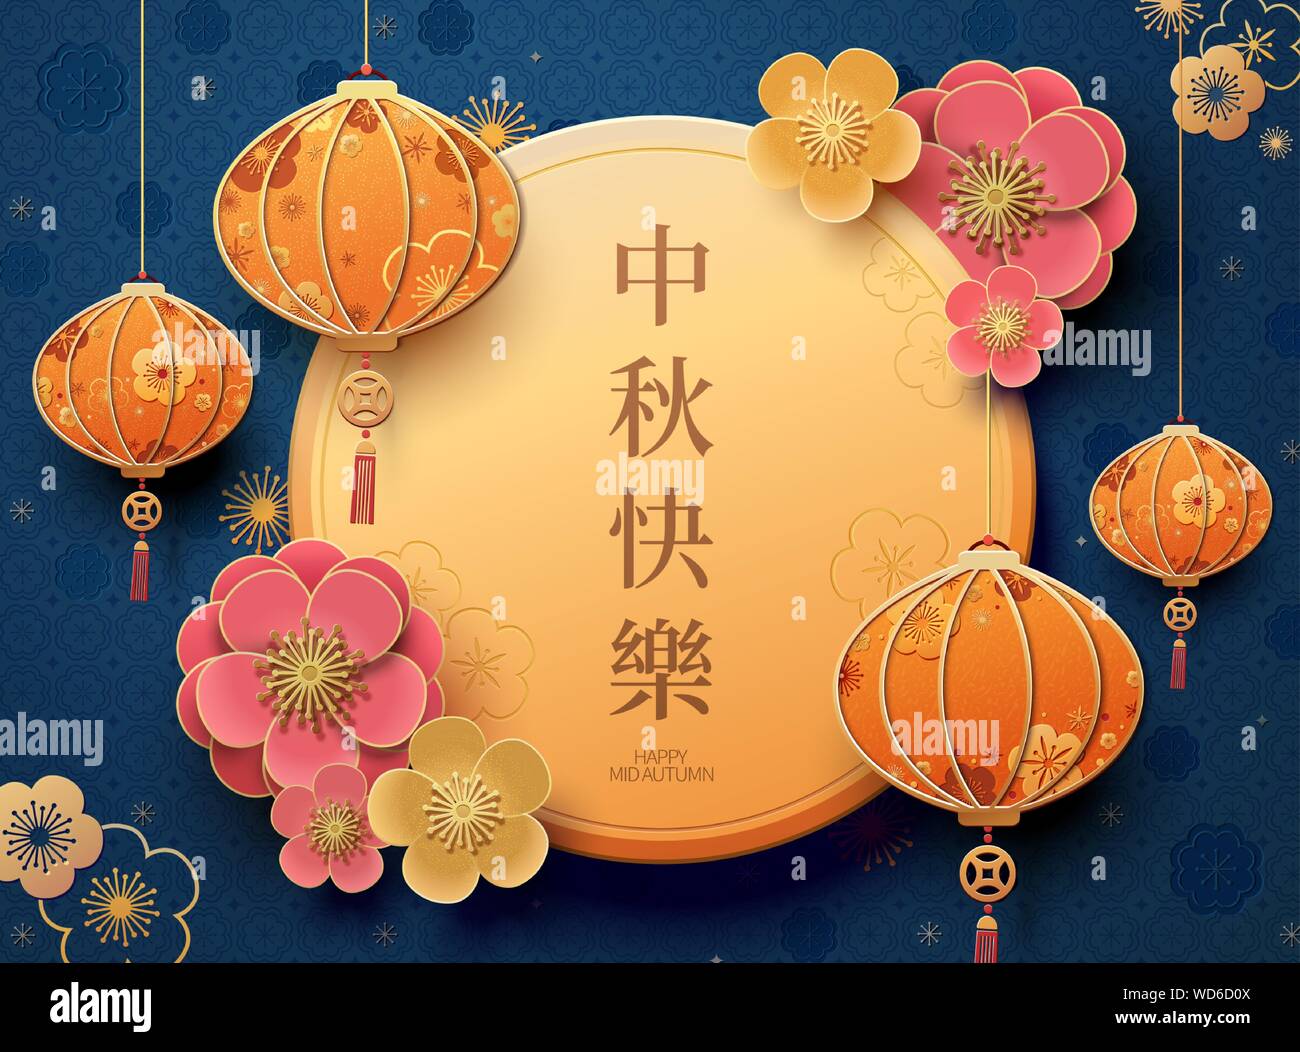 Happy Mid Autumn festival with hanging lanterns and flowers, Holiday name written in Chinese words Stock Vector